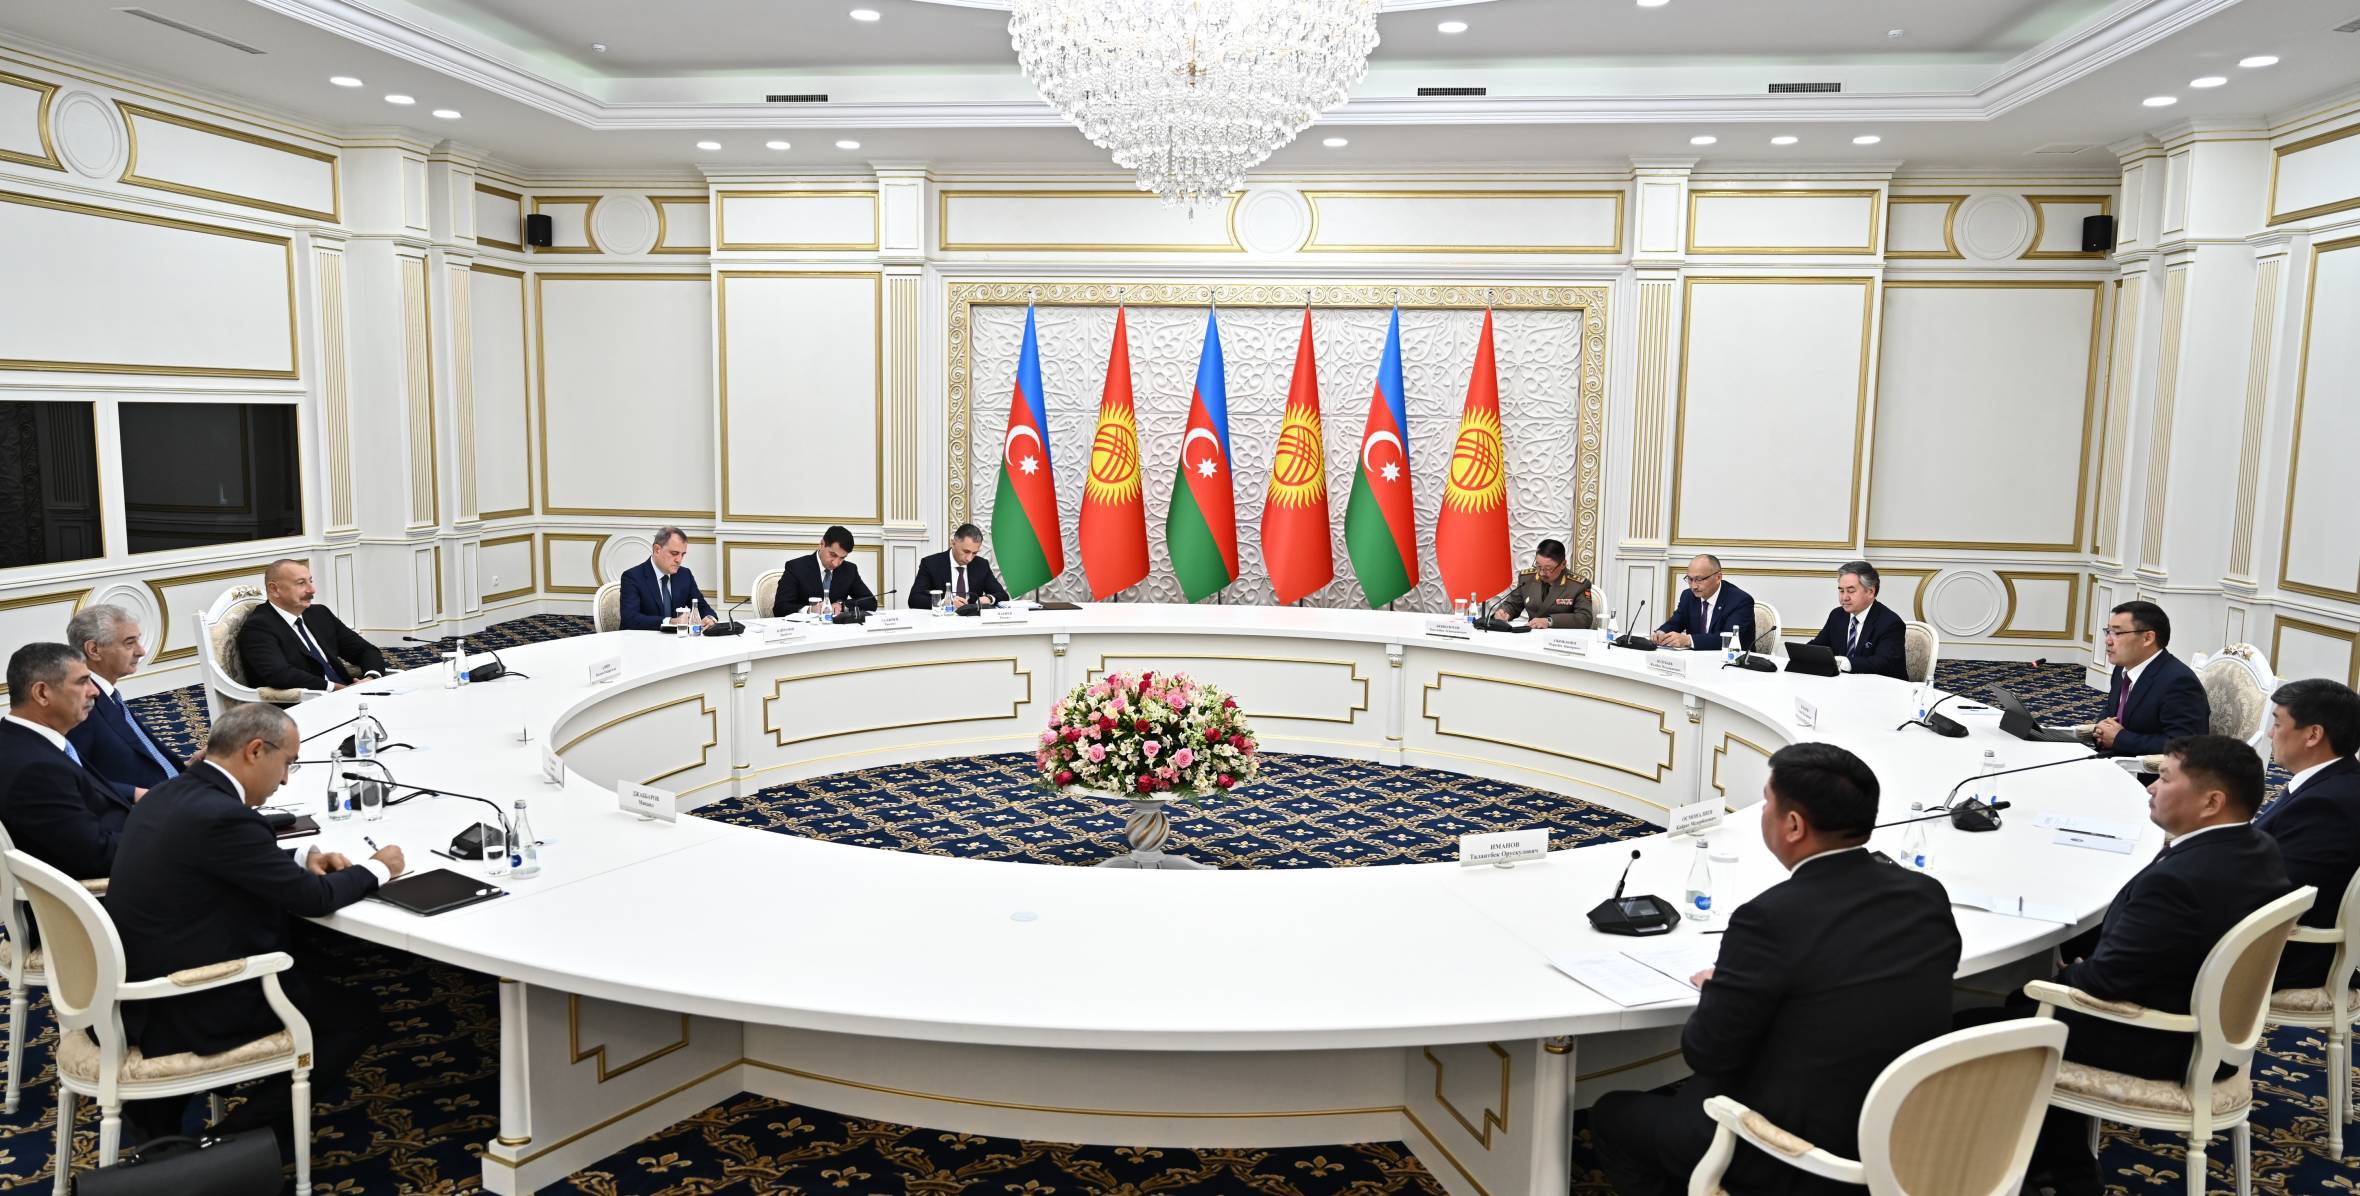 Bishkek hosted meeting of First Interstate Council of Azerbaijan and Kyrgyzstan in limited format